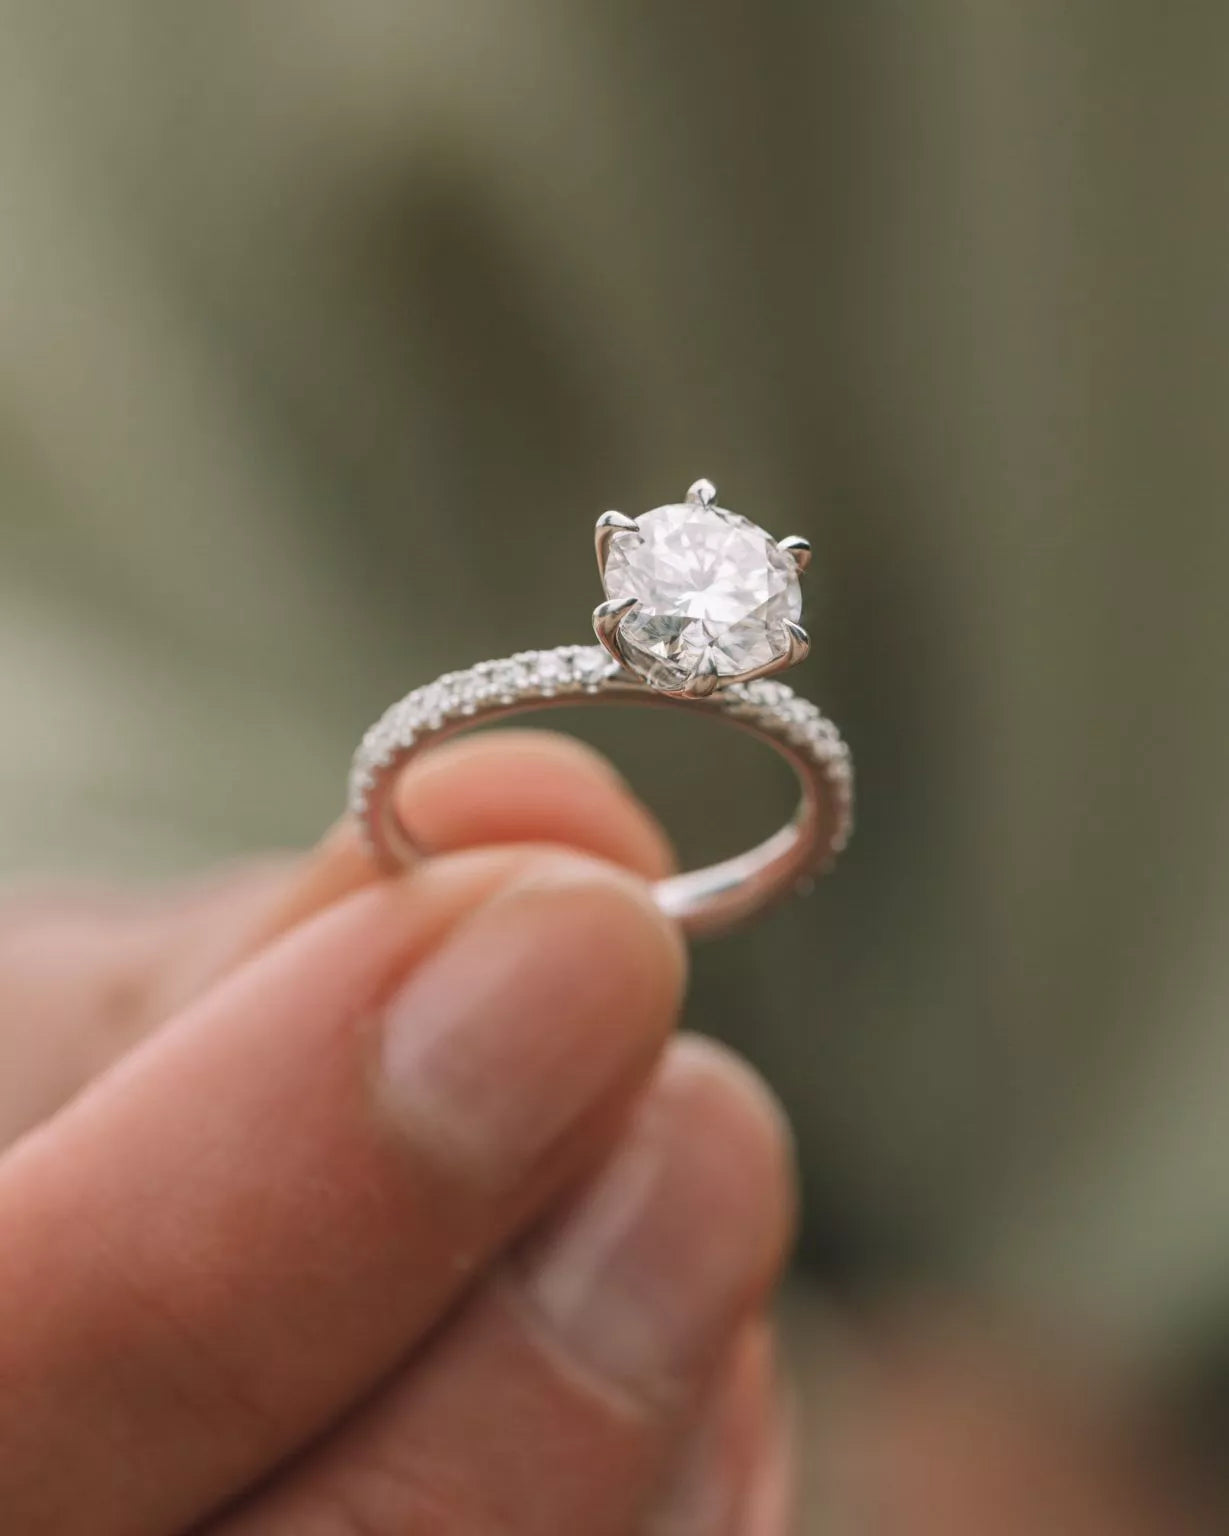 Engagement Rings and Wedding Bands | Bennion Jewelers - Salt Lake City